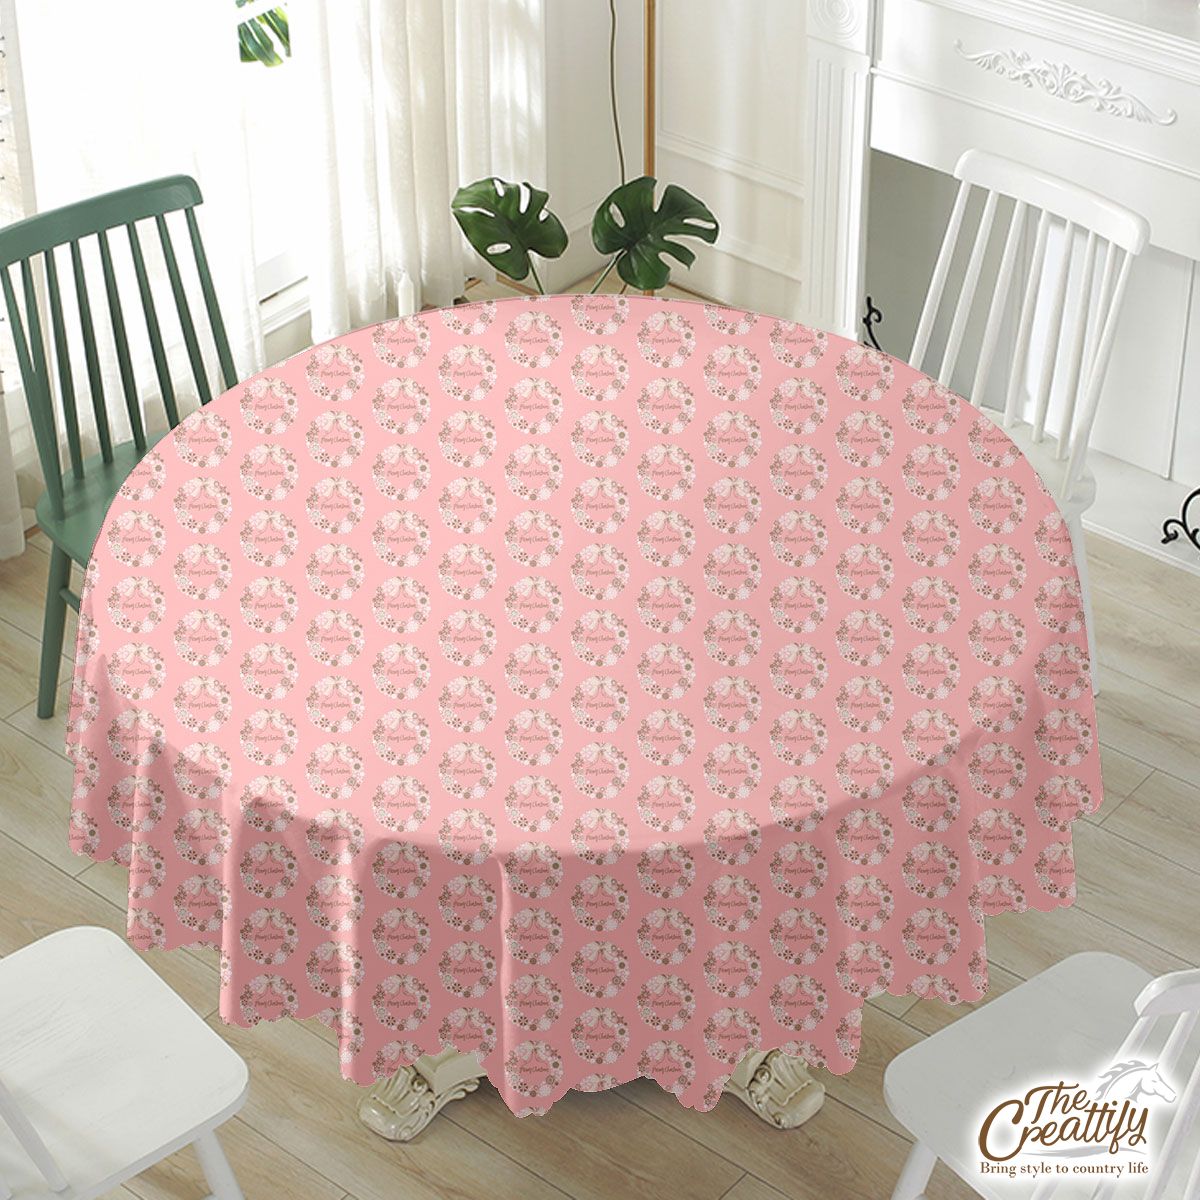 Merry Christmas With Christmas Wreath, Snowflake Waterproof Tablecloth